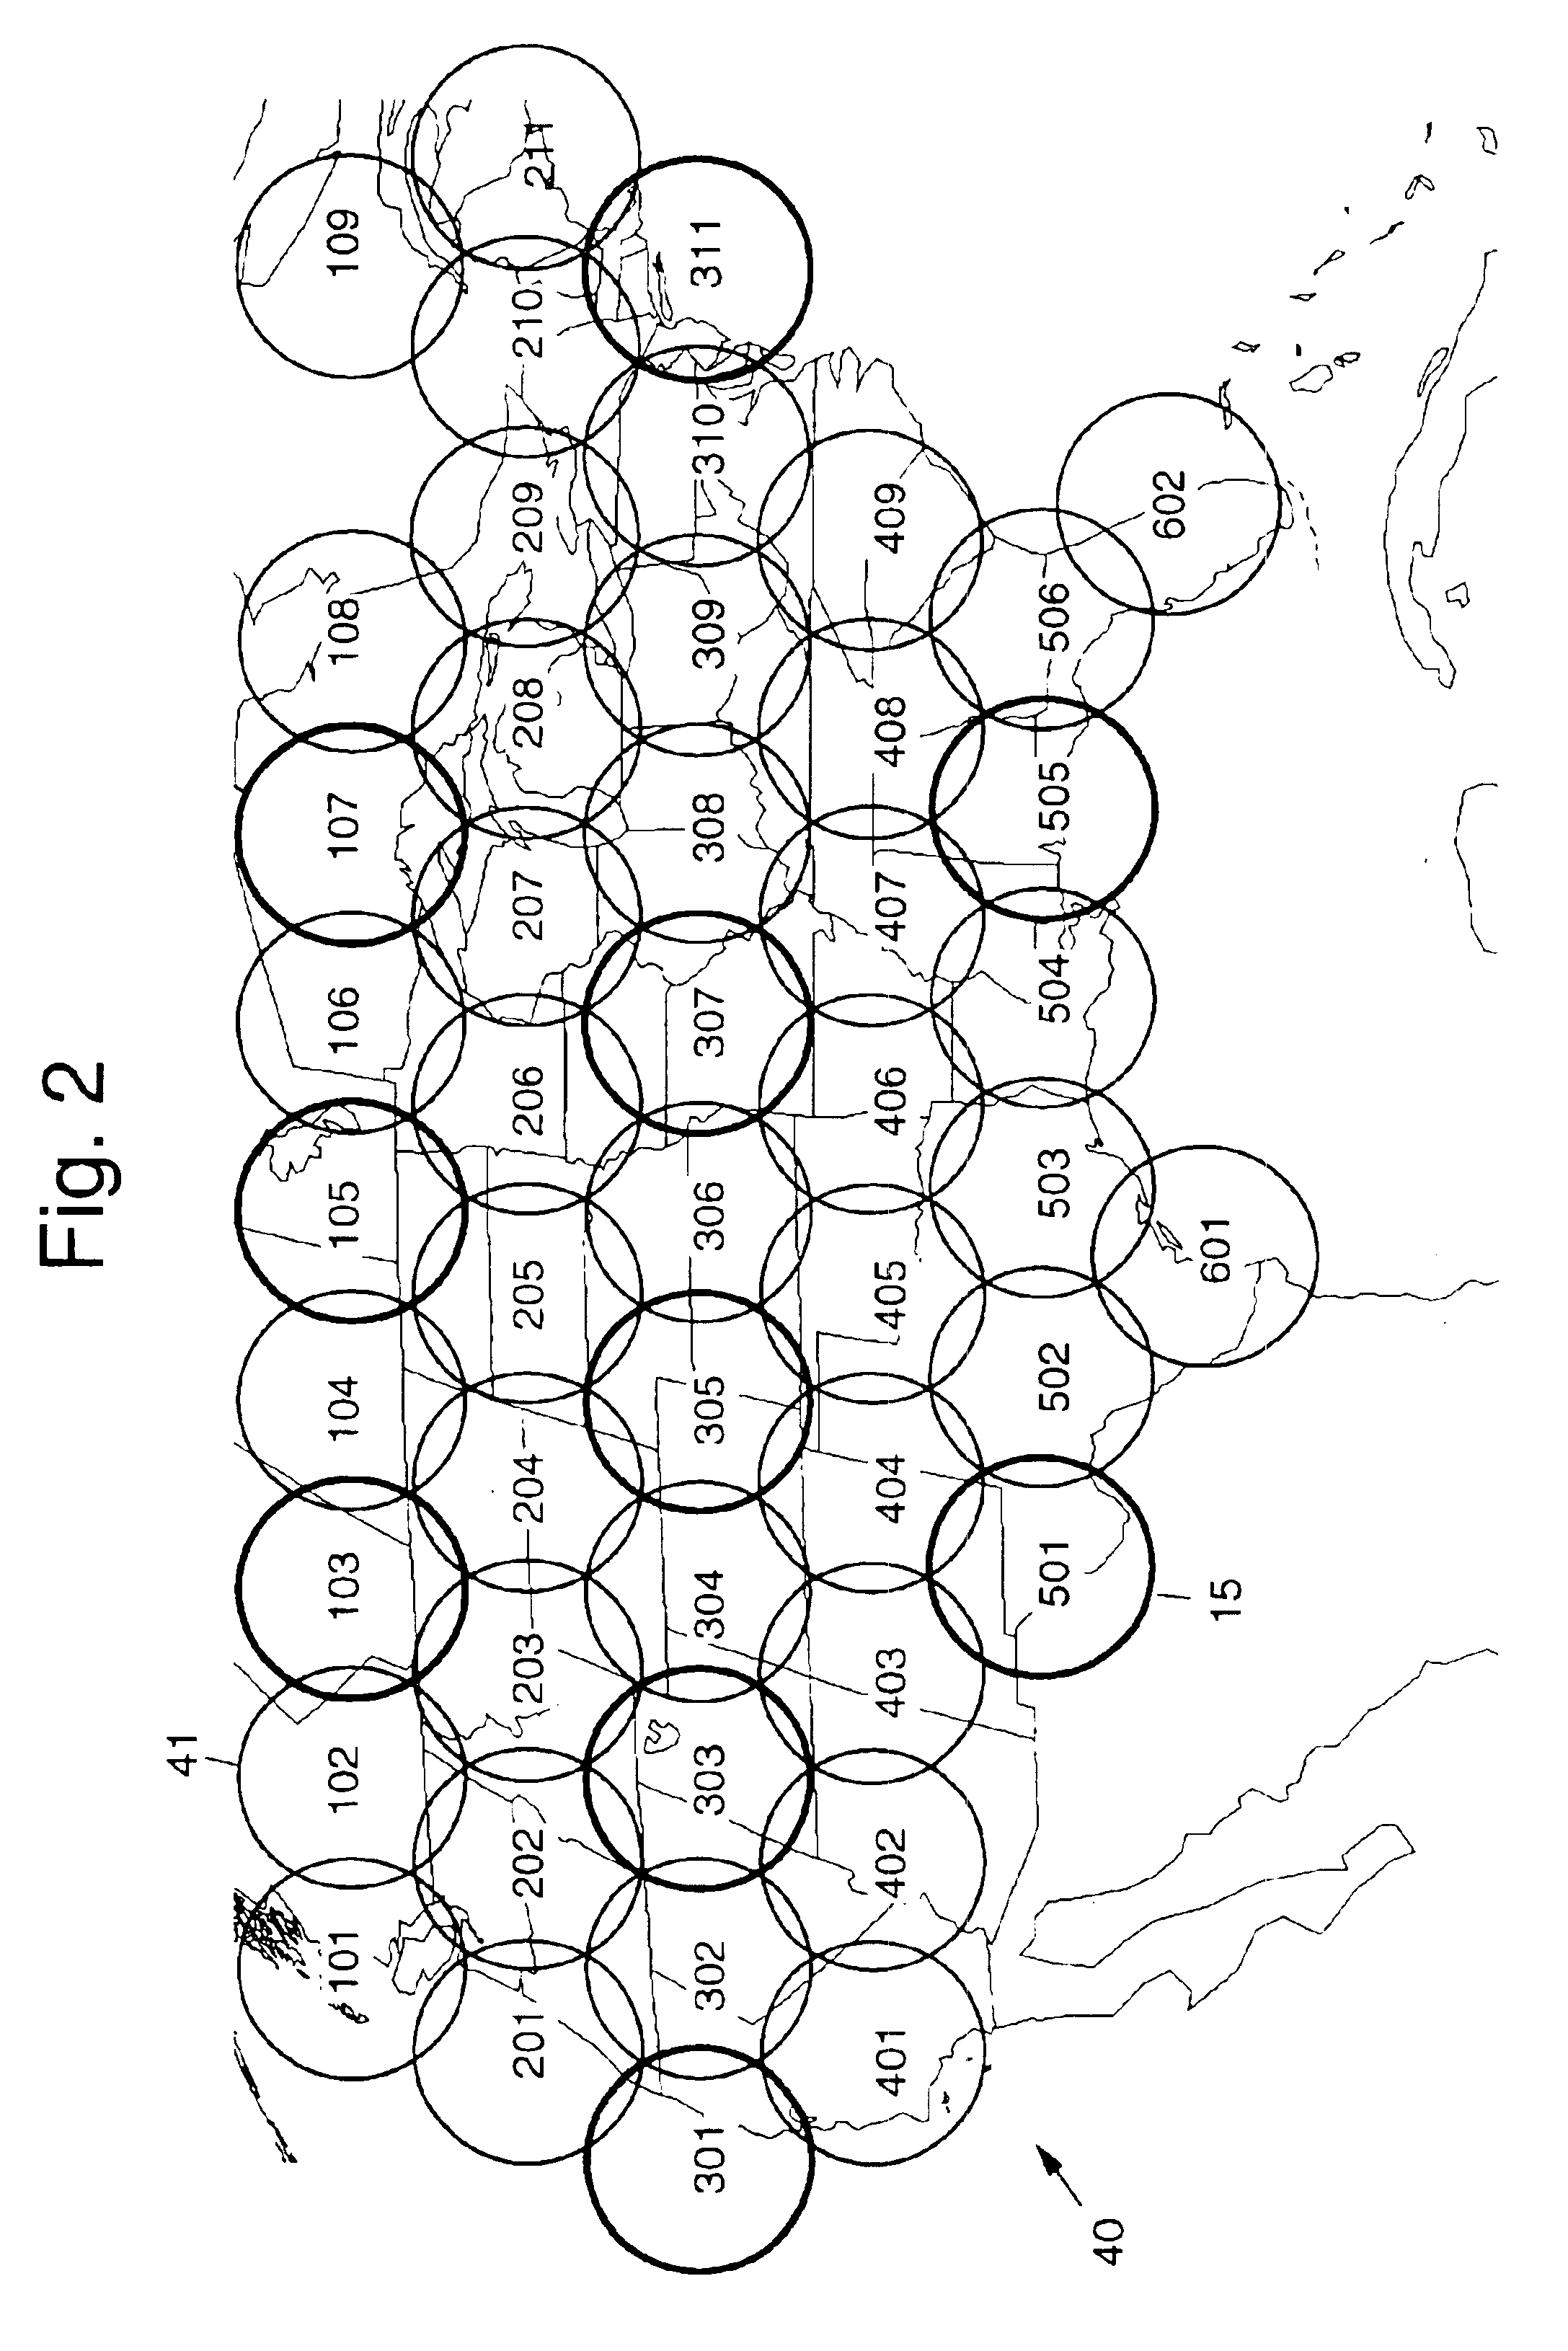 Broadband communication systems and methods using low and high bandwidth request and broadcast links